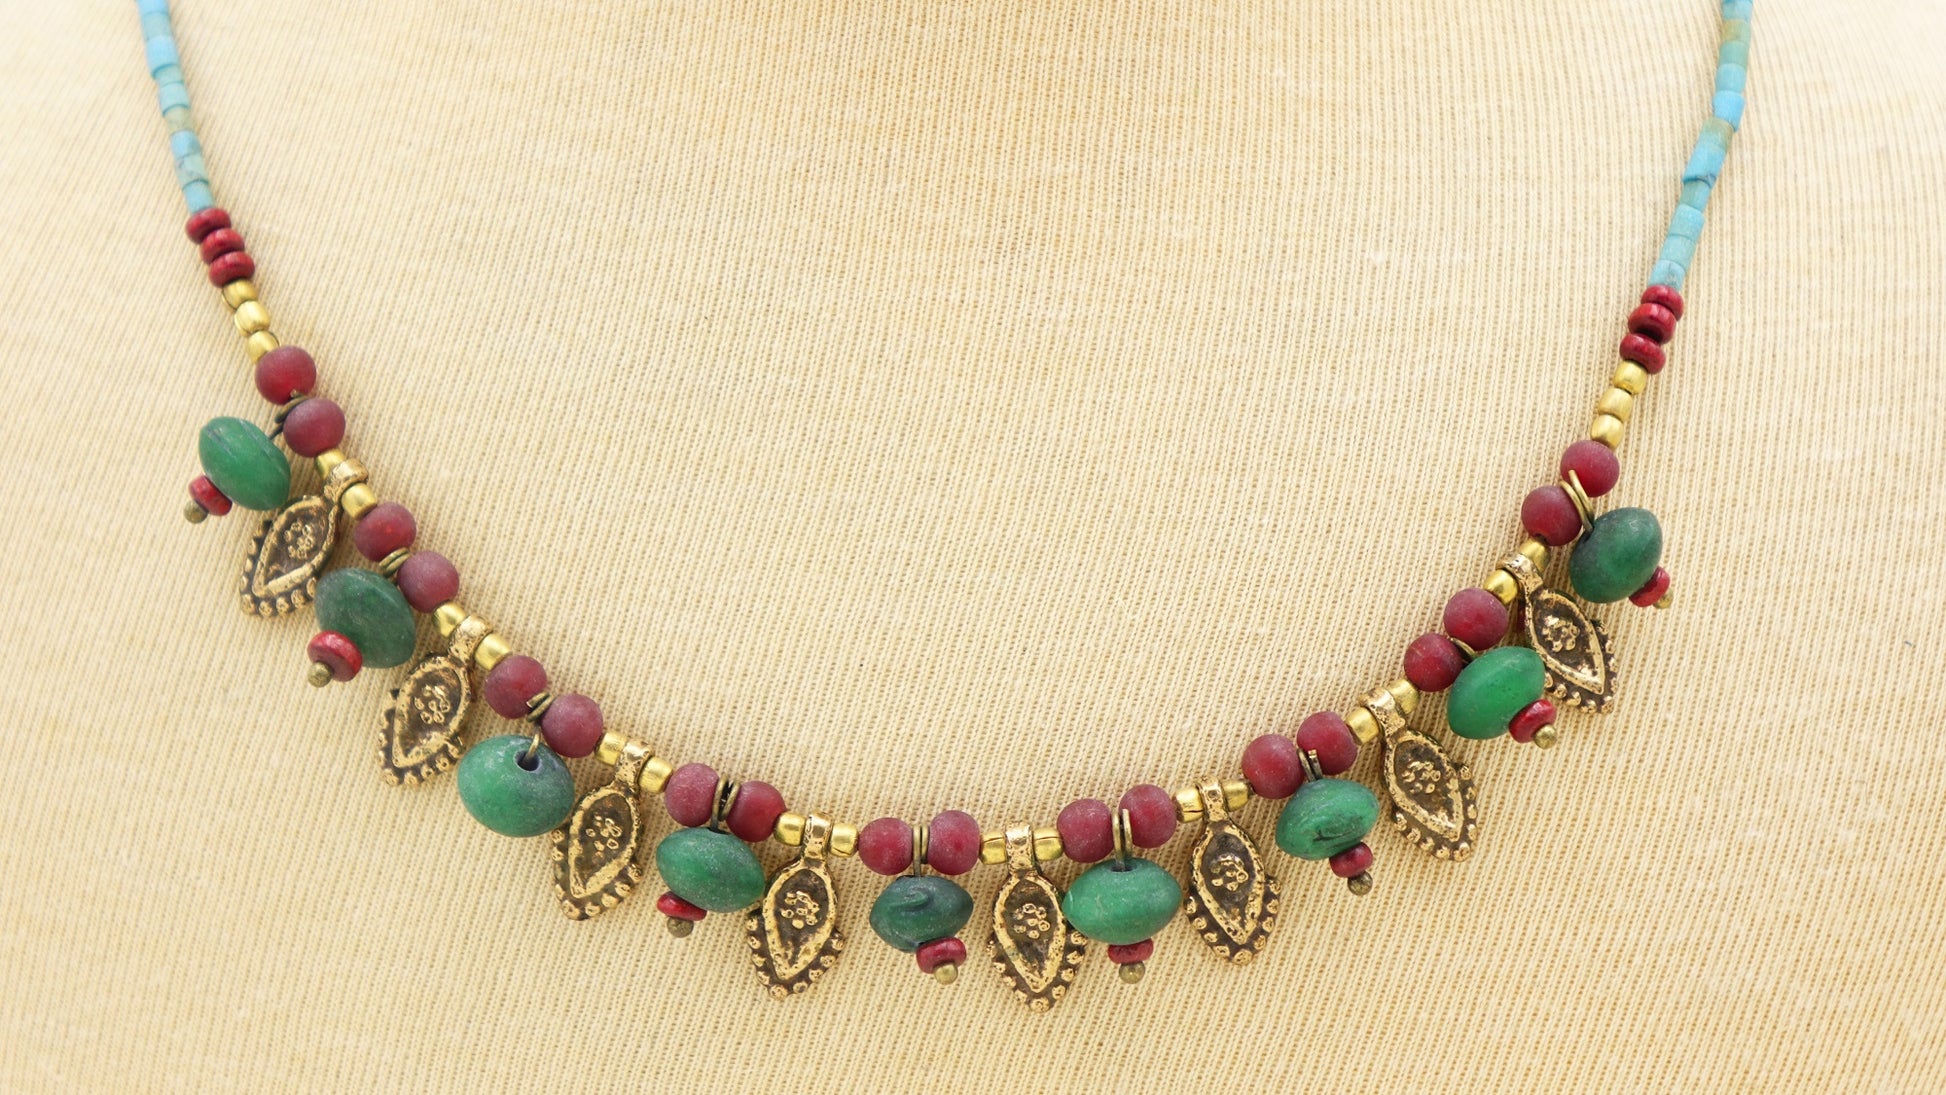 Ancient Goddess Chic Necklace Boho chic style, colorful, beaded, authentic necklace.